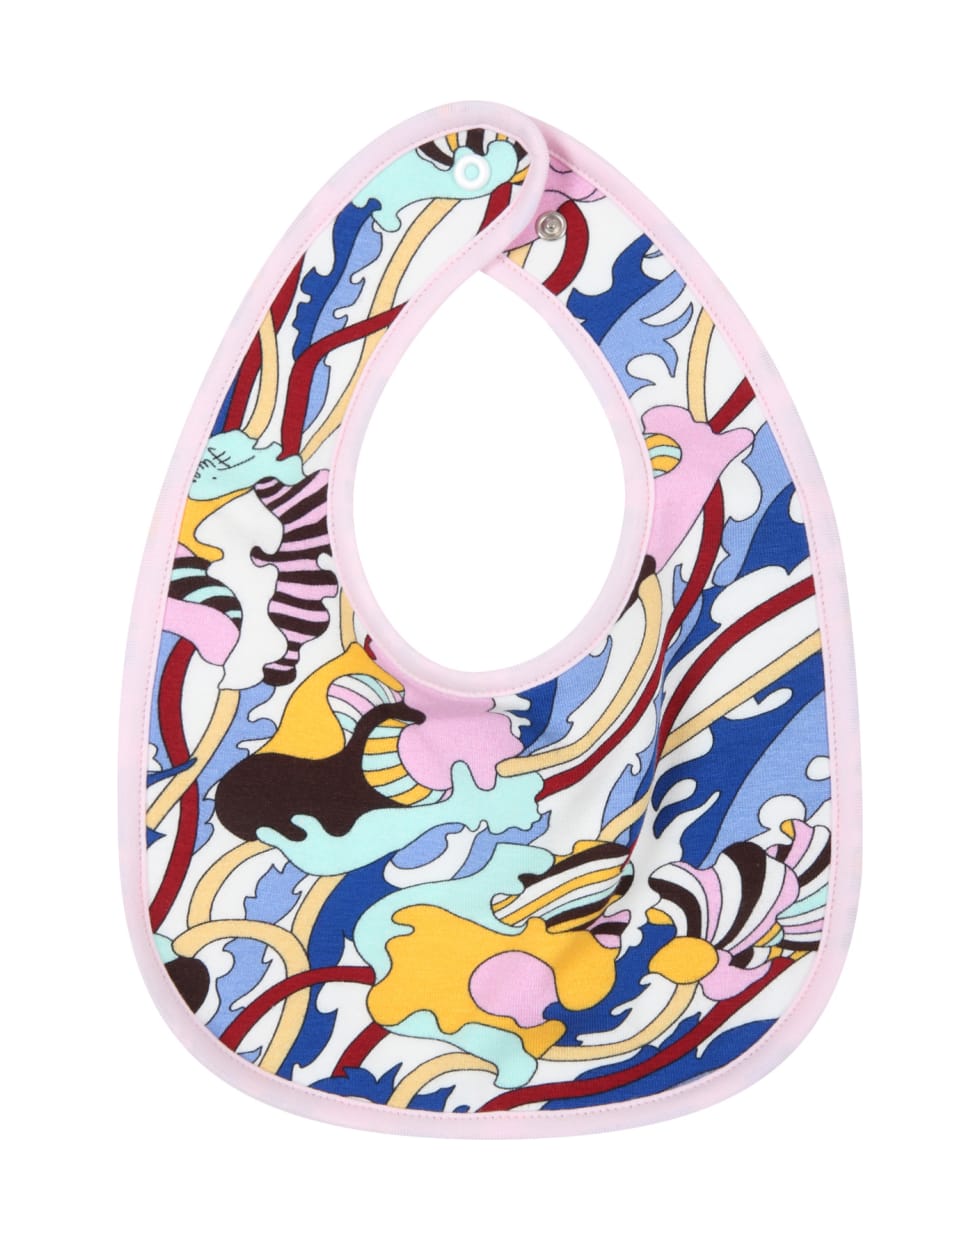 Emilio Pucci Multicolor Set For Baby Girl With Iconic Print - Multicolor